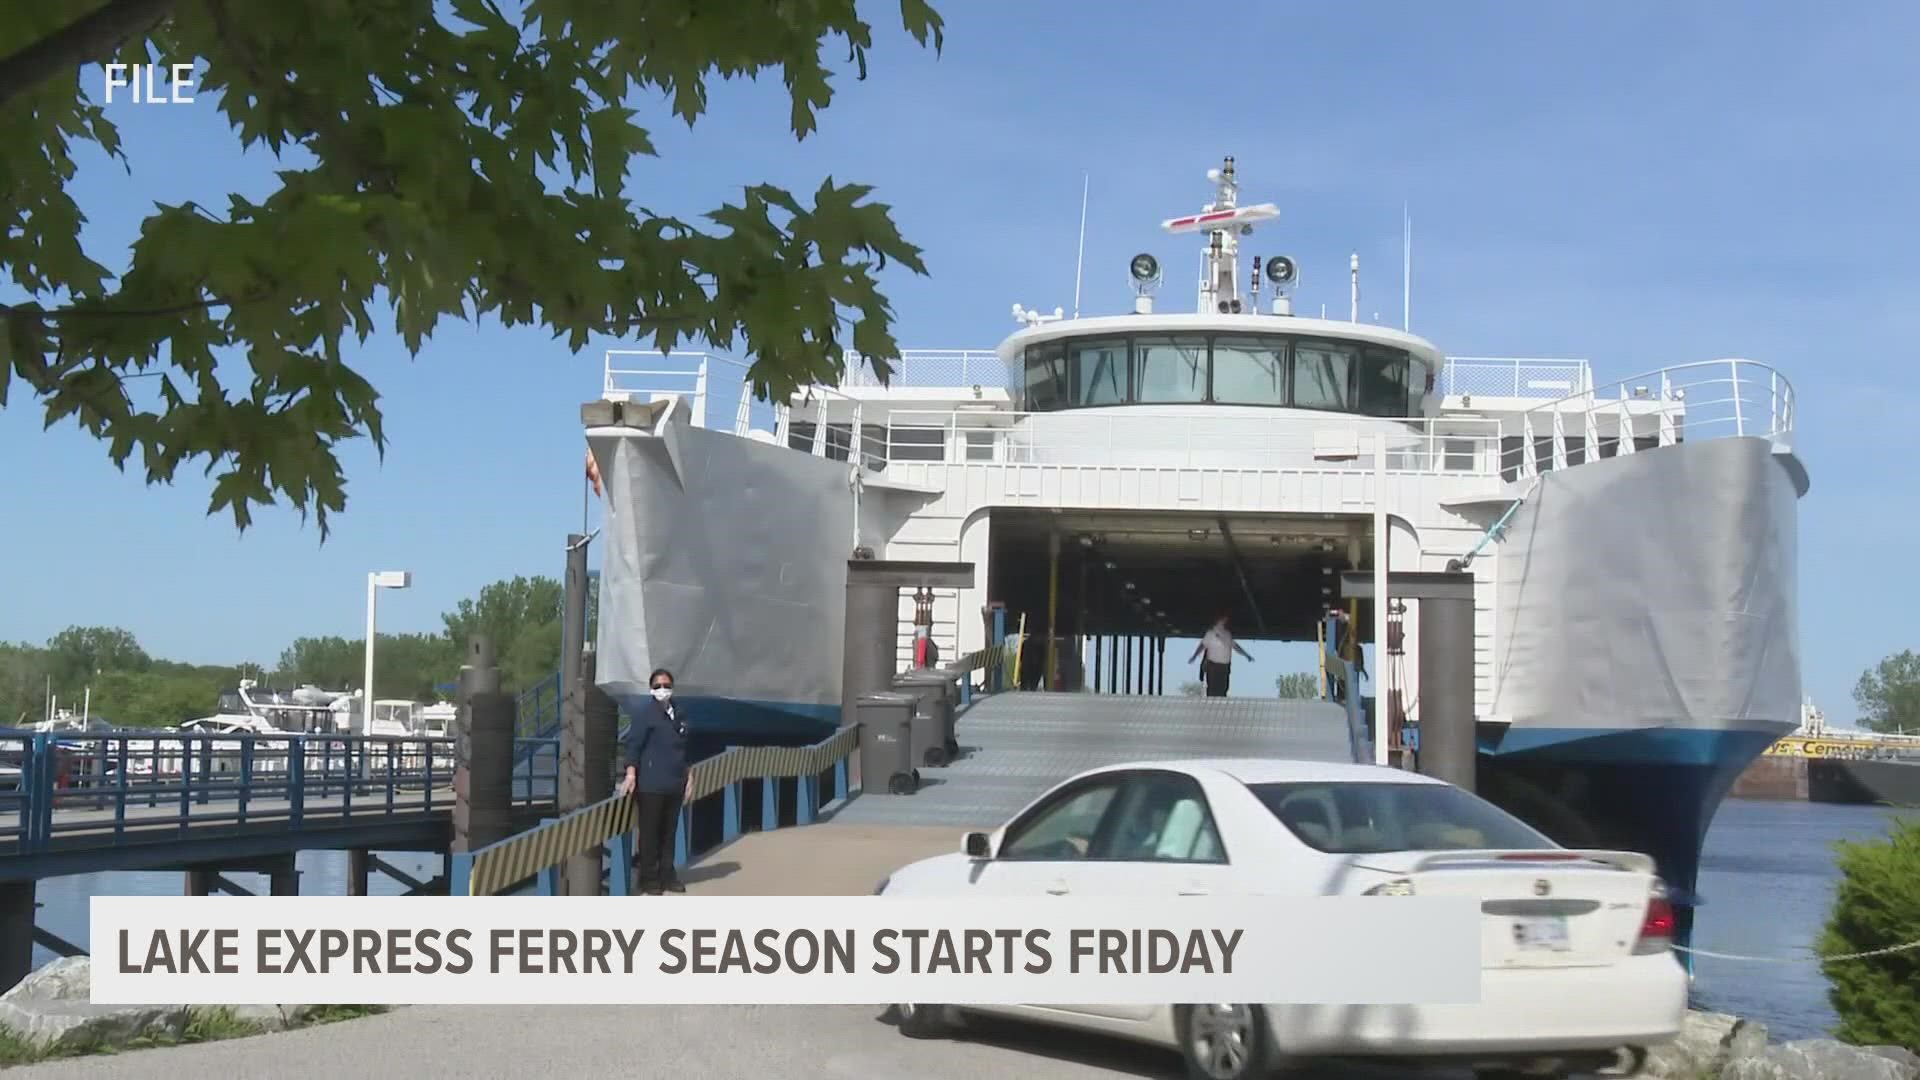 The Lake Express Ferry makes daily treks between Wisconsin and West Michigan through the spring and summer months.